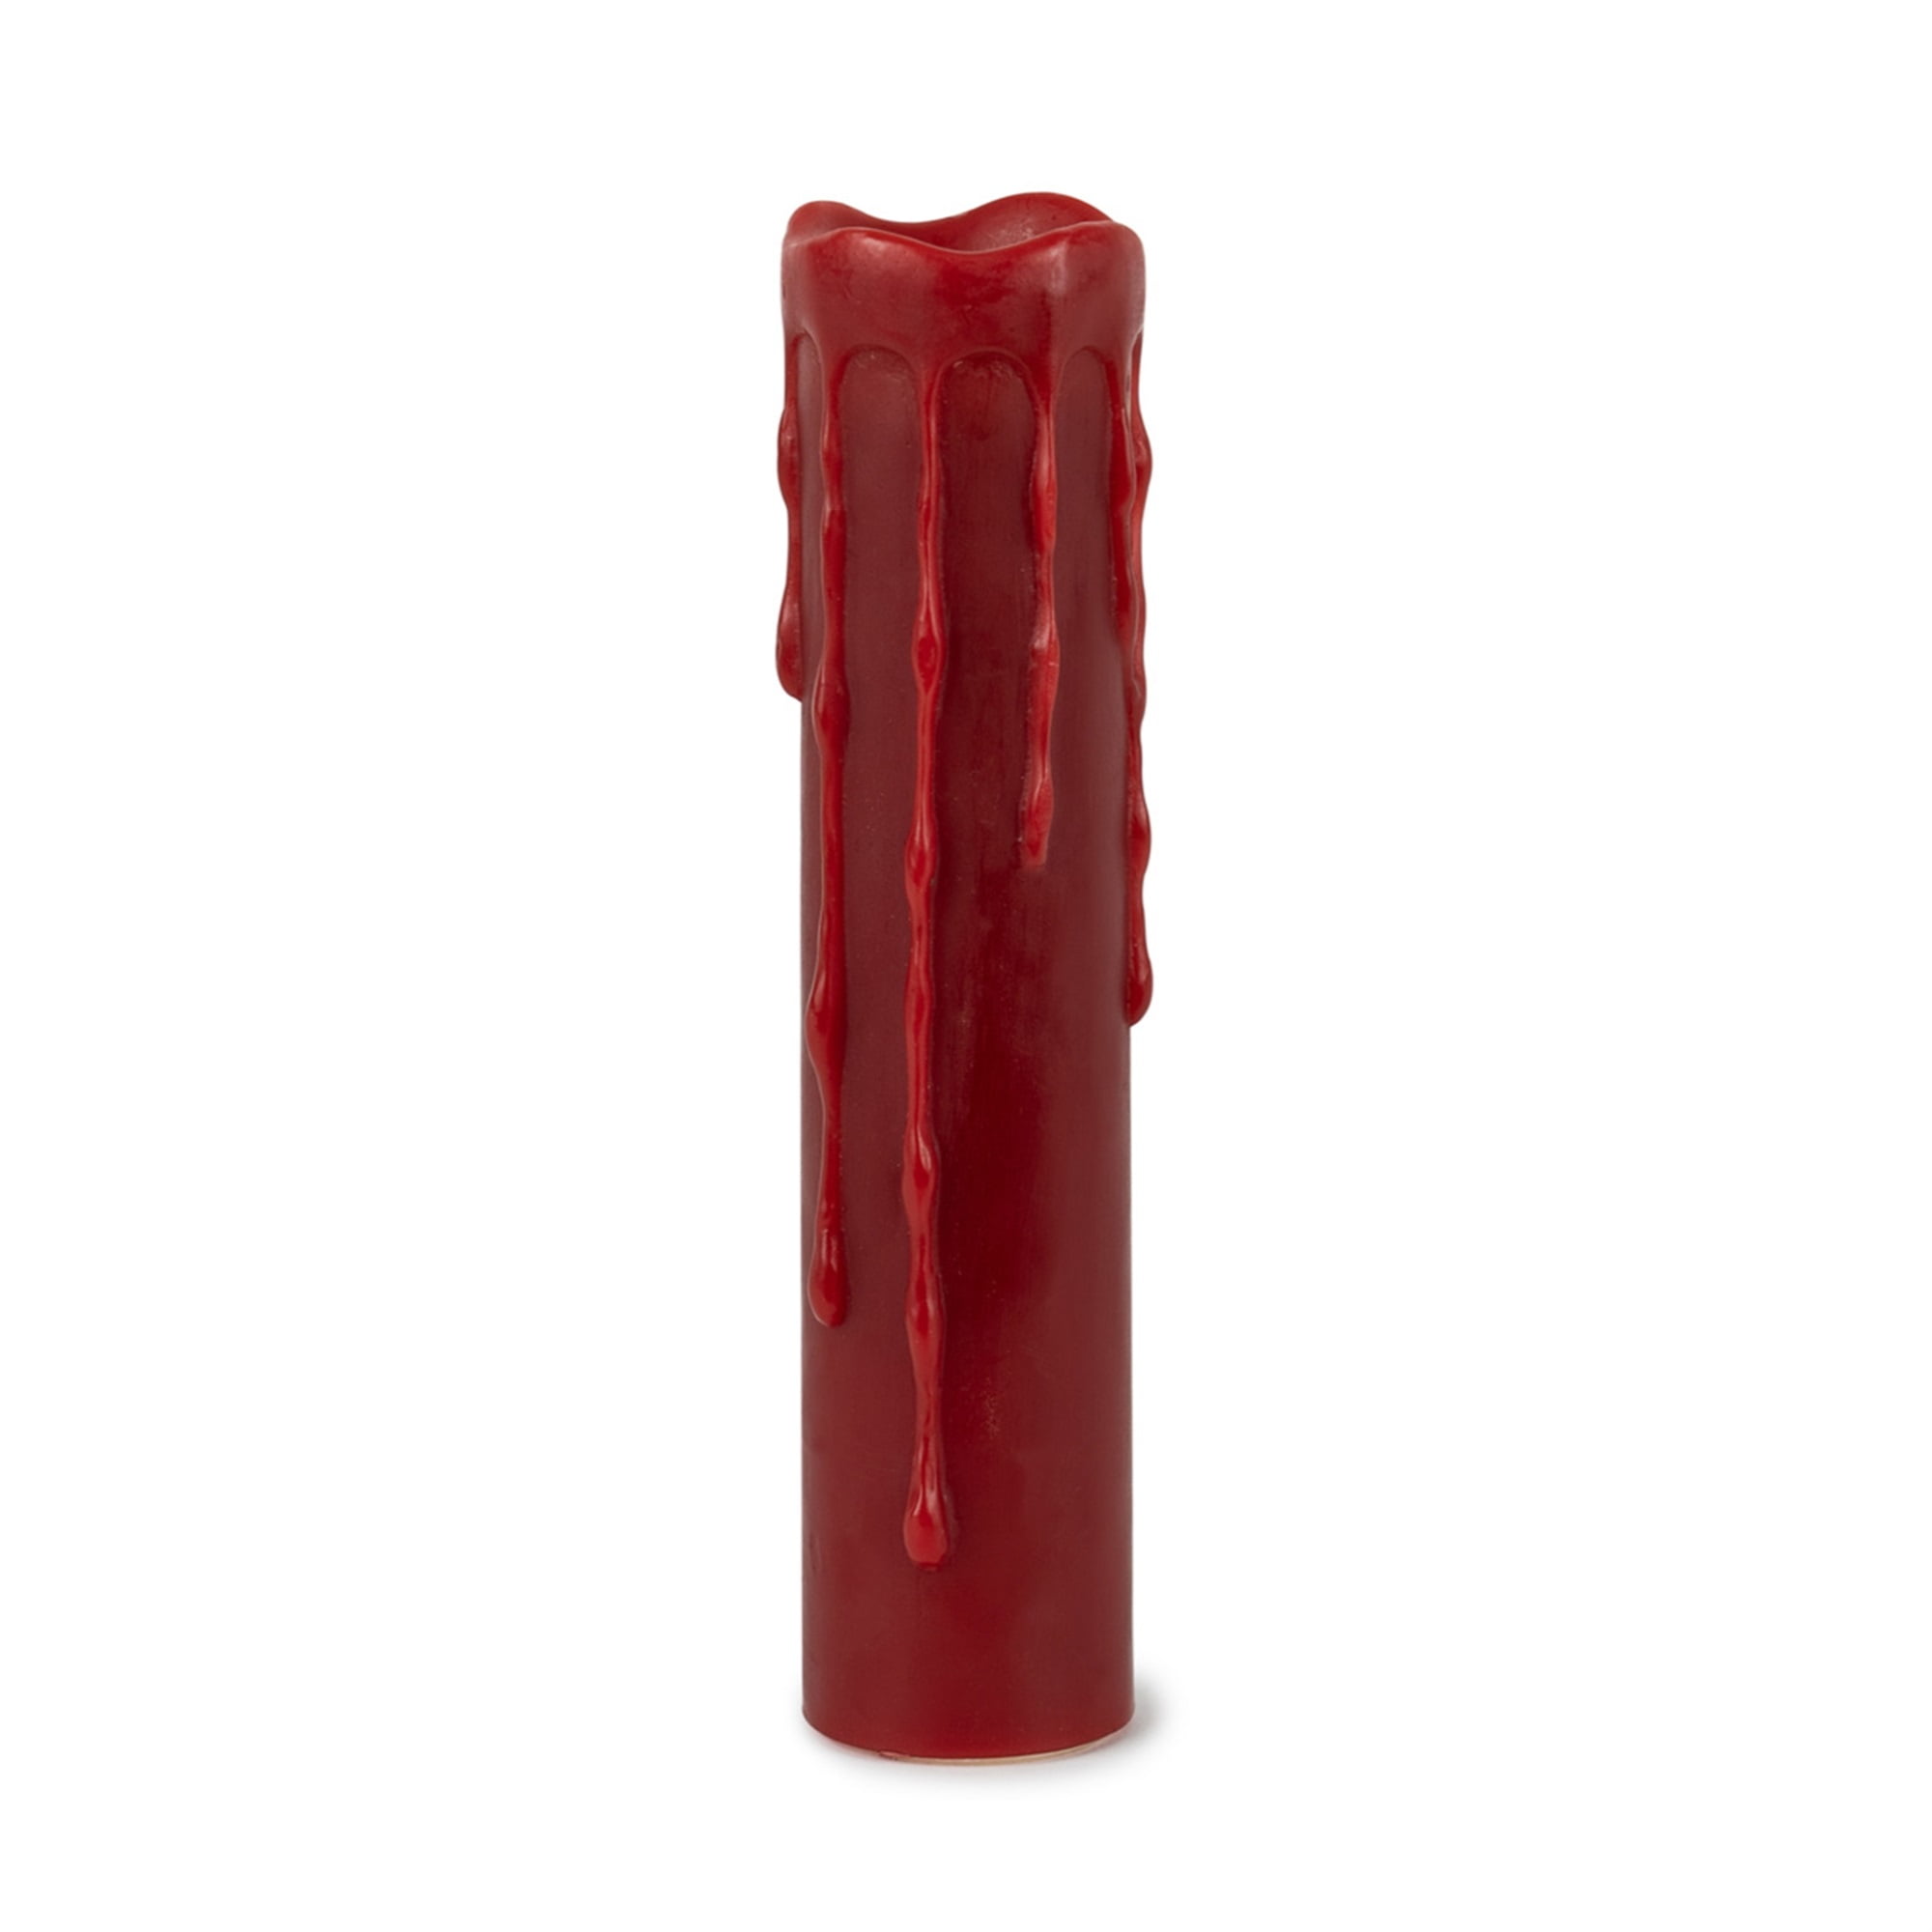 LED Wax Dripping Pillar Candle with remote and 4 and 8 Hour Timer (Set of 2) 1.75"Dx8"H Wax/Plastic